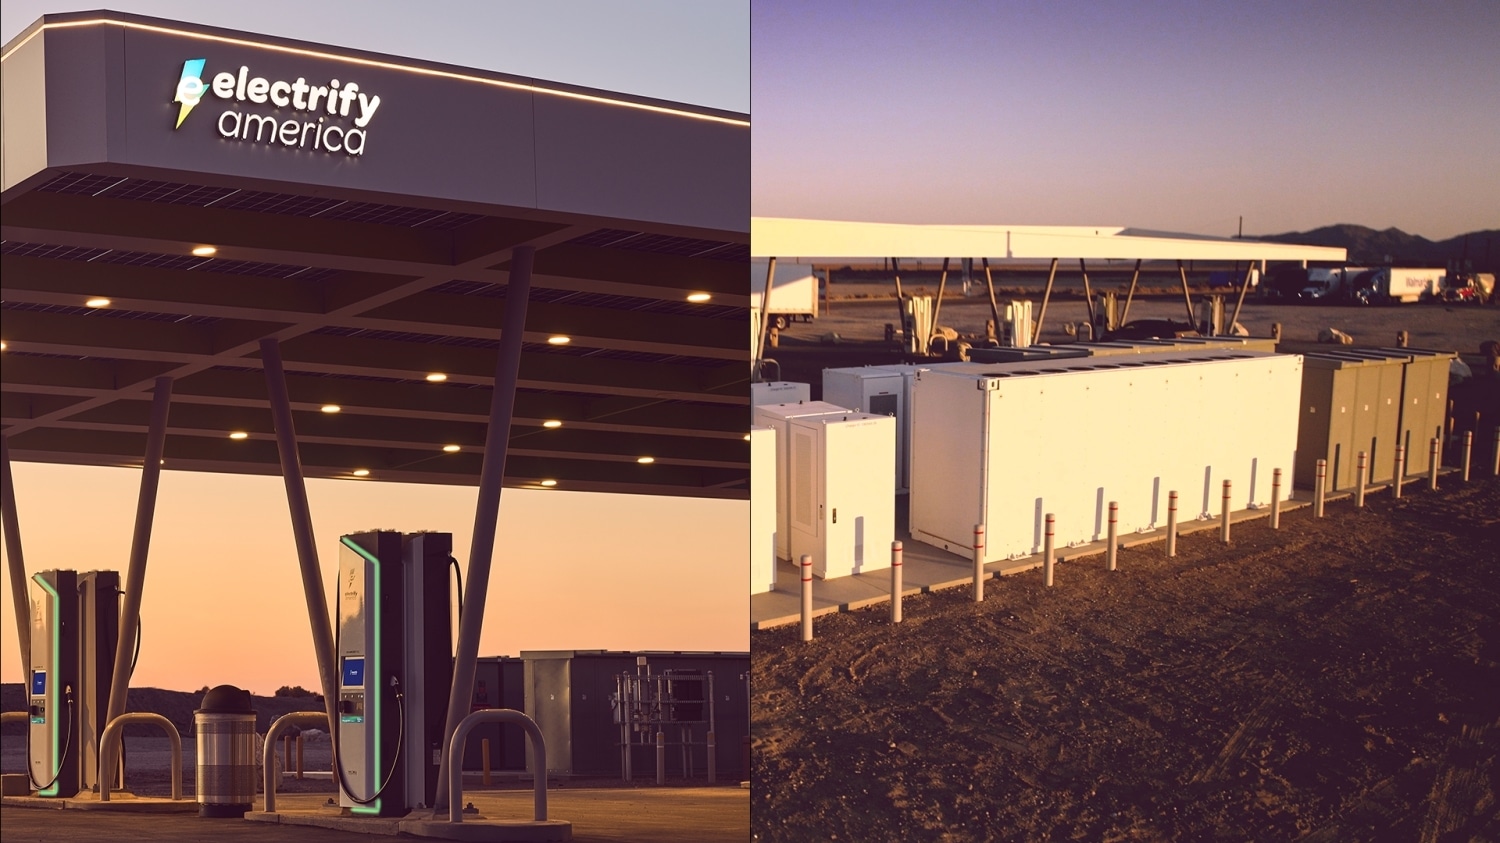 Electrify America Unveils Its First Application of Megawatt-Level Energy Storage to Enhance Customer Experience